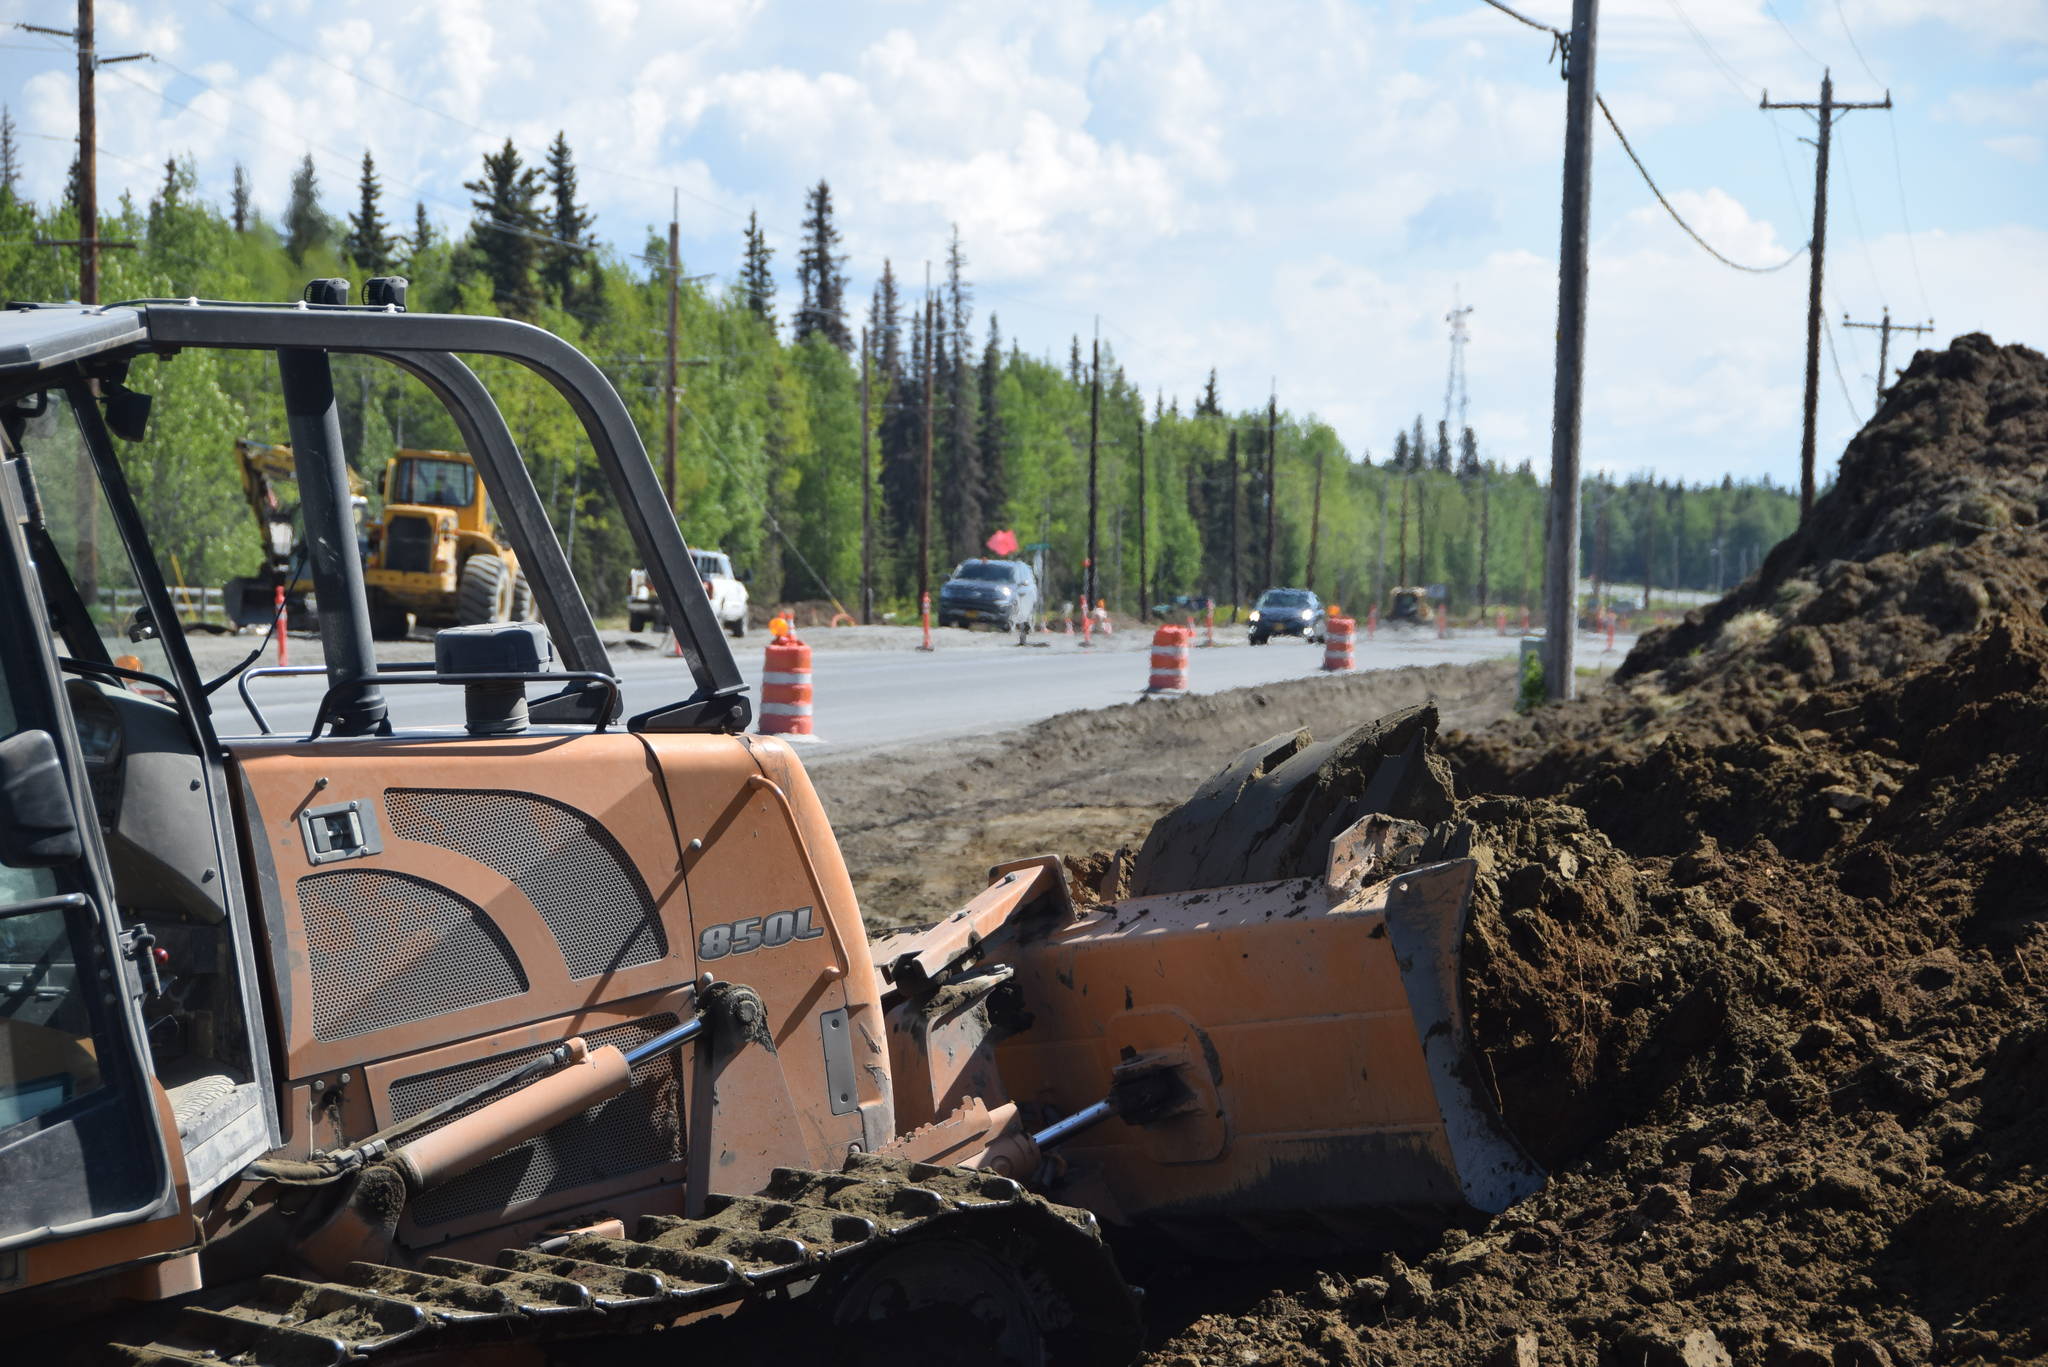 Construction crews excavate along the side of the Kenai Spur Highway in Soldotna, Alaska, on Tuesday, June 4, 2019. (Photo by Brian Mazurek/Peninsula Clarion)